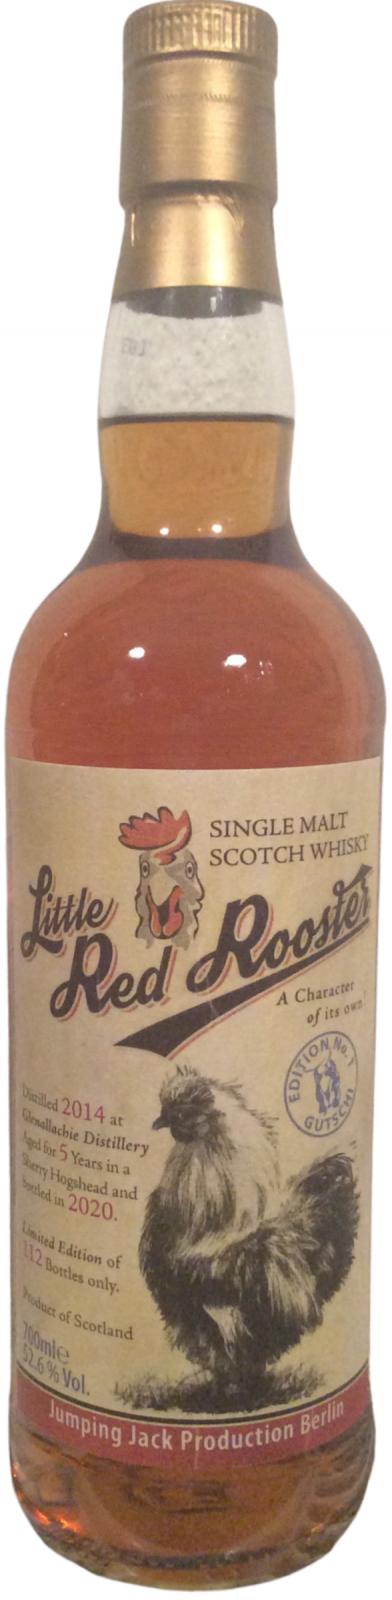 Glenallachie 2014 JW Little Red Rooster 52.6% 700ml